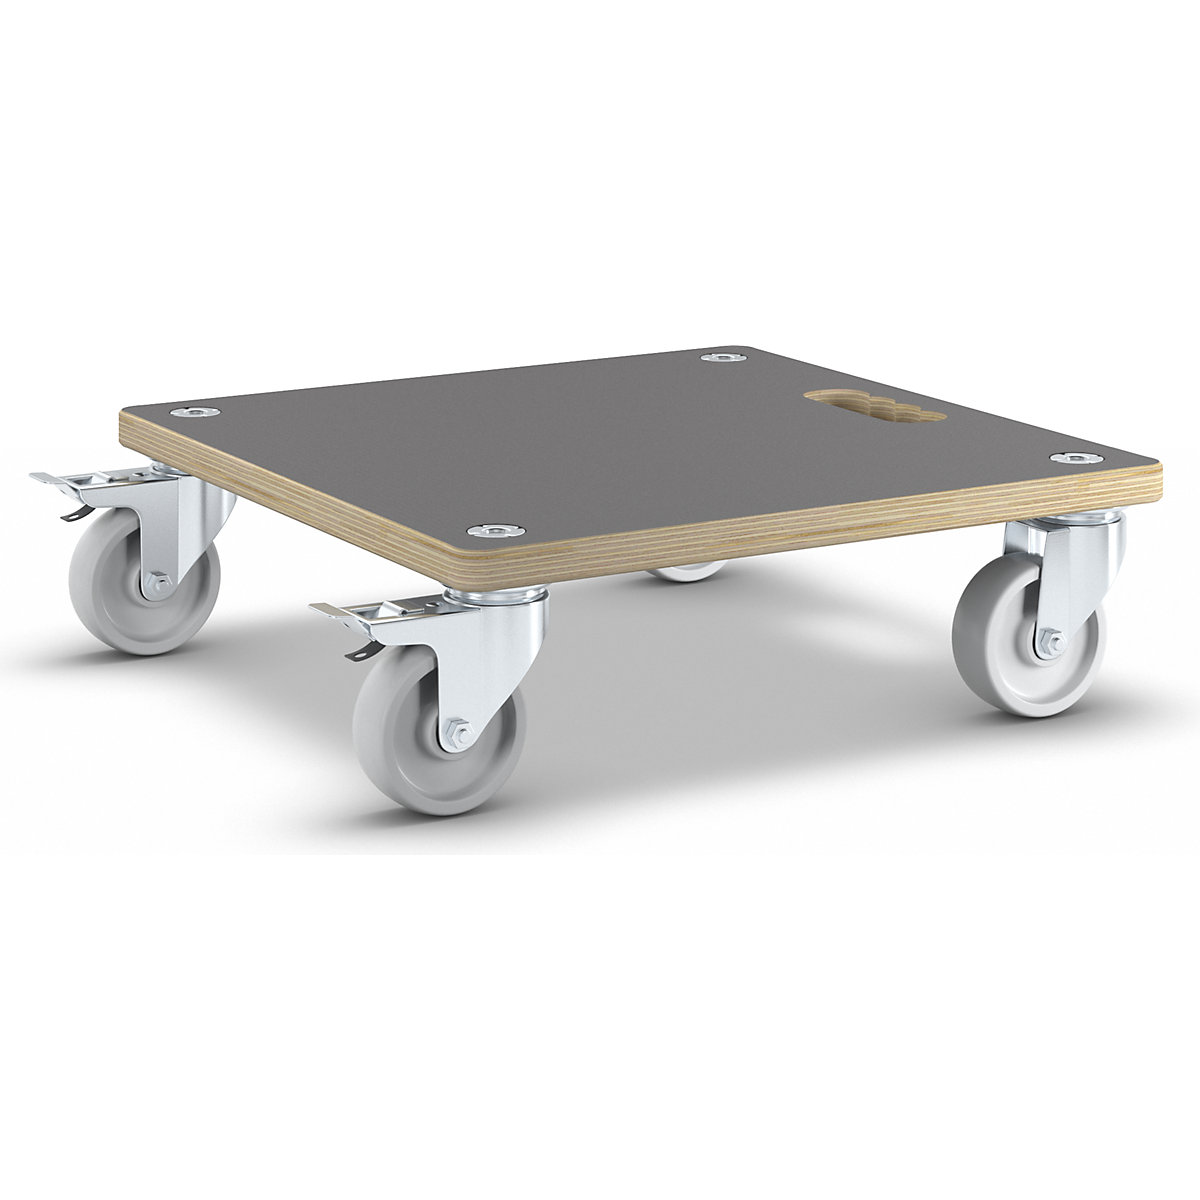 MaxiGRIP transport dolly – Wagner